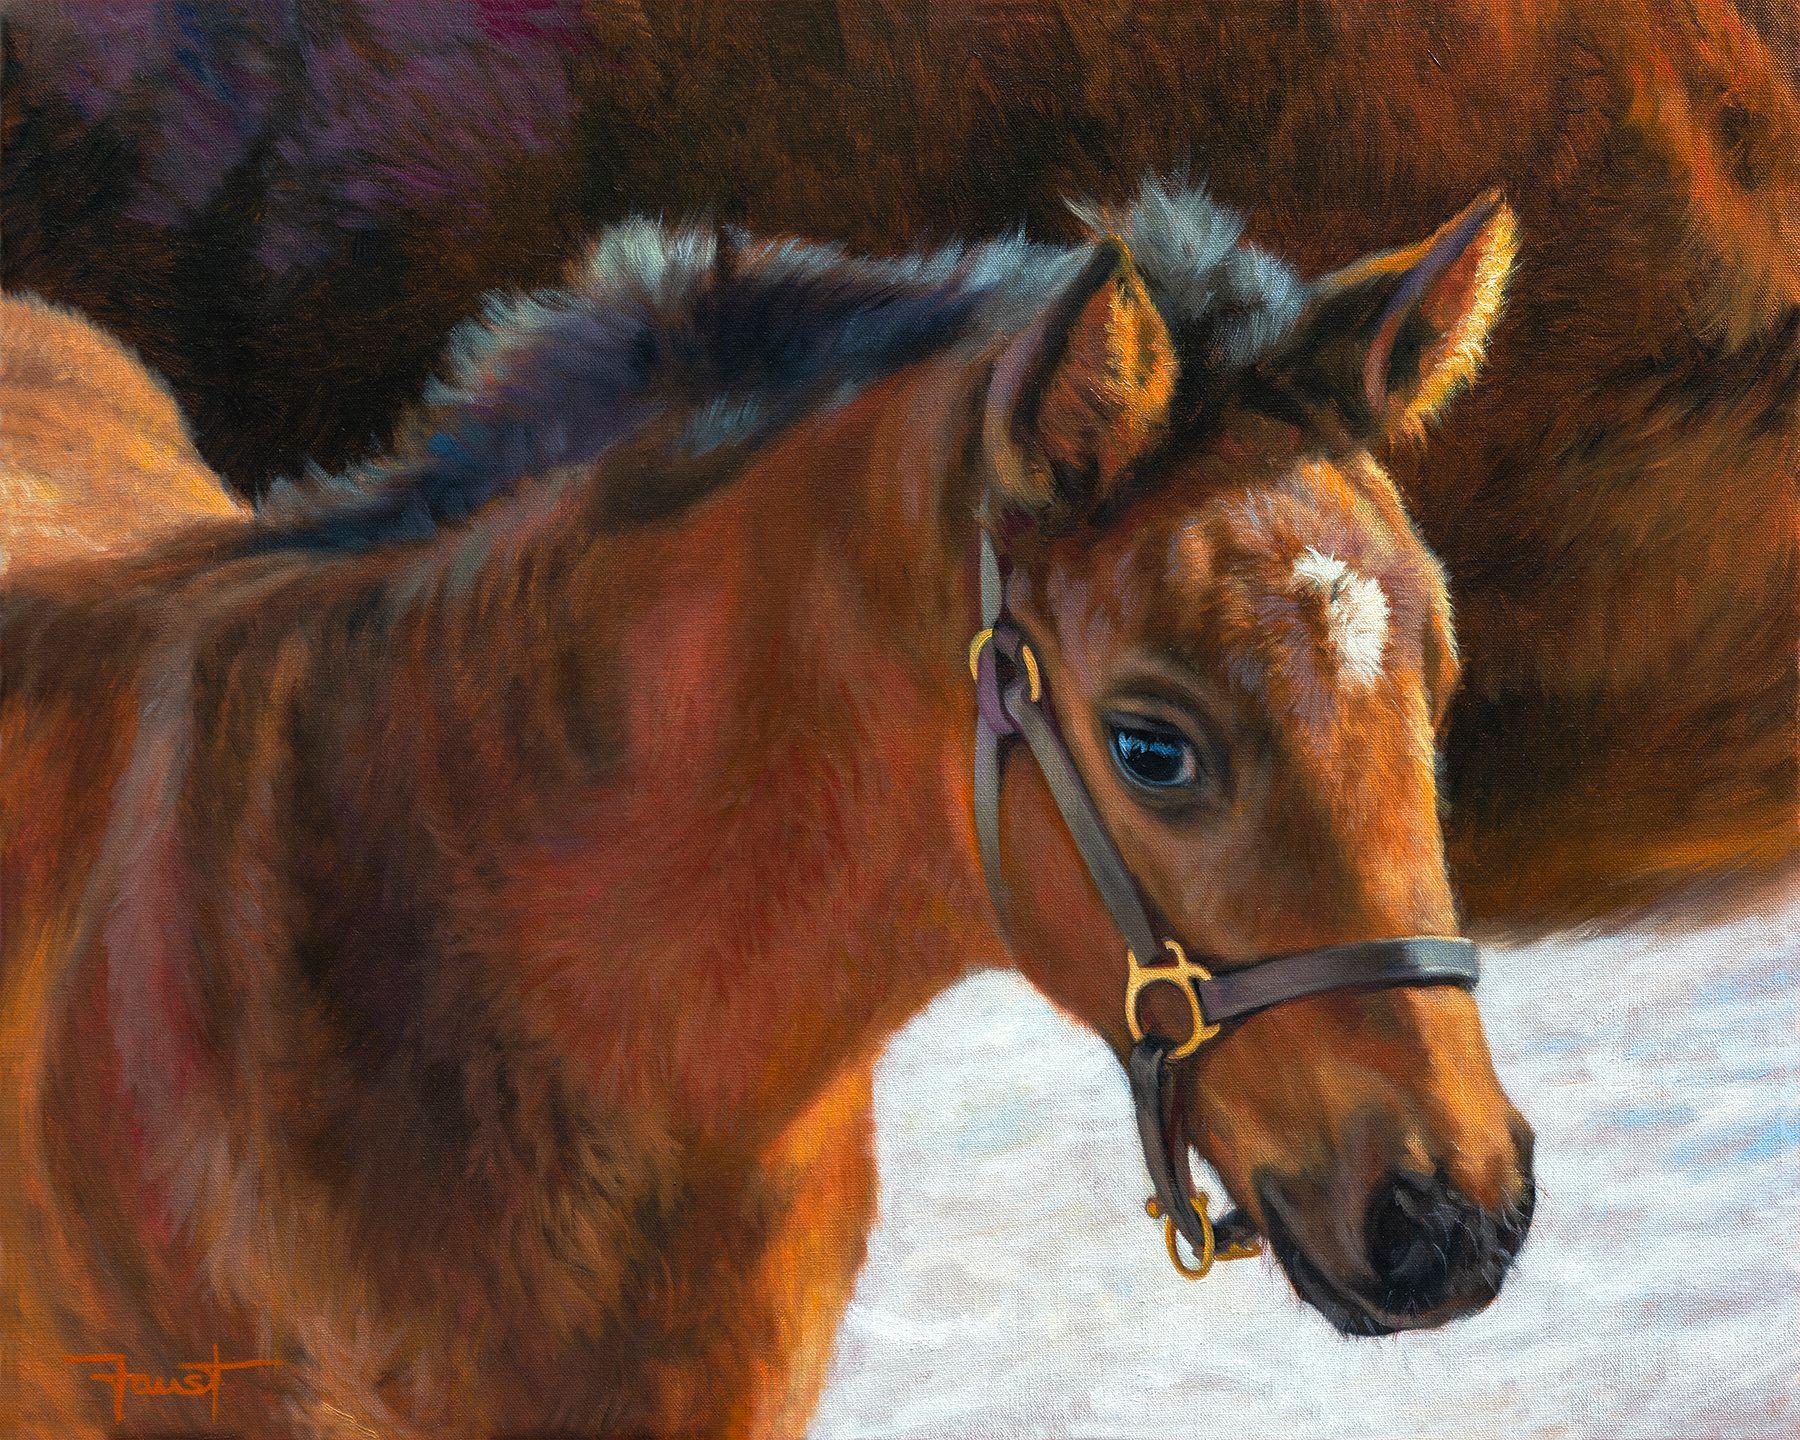 This equine oil painting on canvas, "Hopium" 24x30 by artist Shawn Faust features a portrait of a newly born brown foal next to the mother. Tufts of hair caught in the light soak in the warmth of the sun on this cold winter day. 

About the